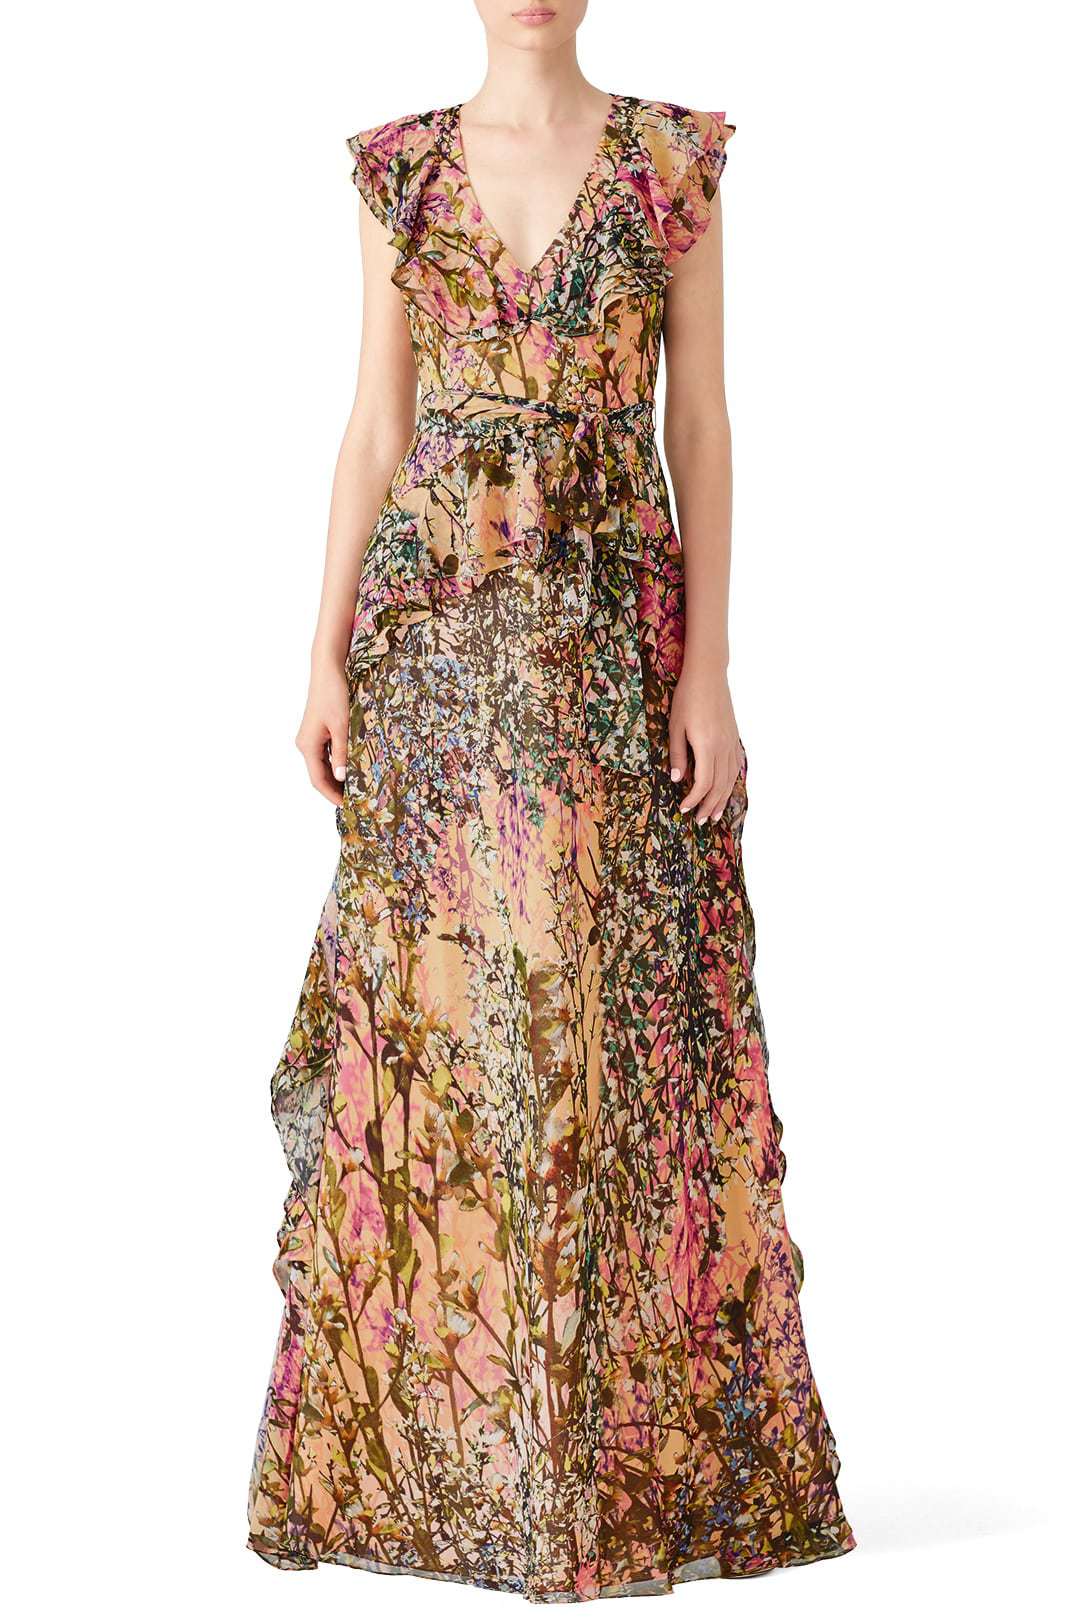 plus size floral floor length gown from Rent the Runway